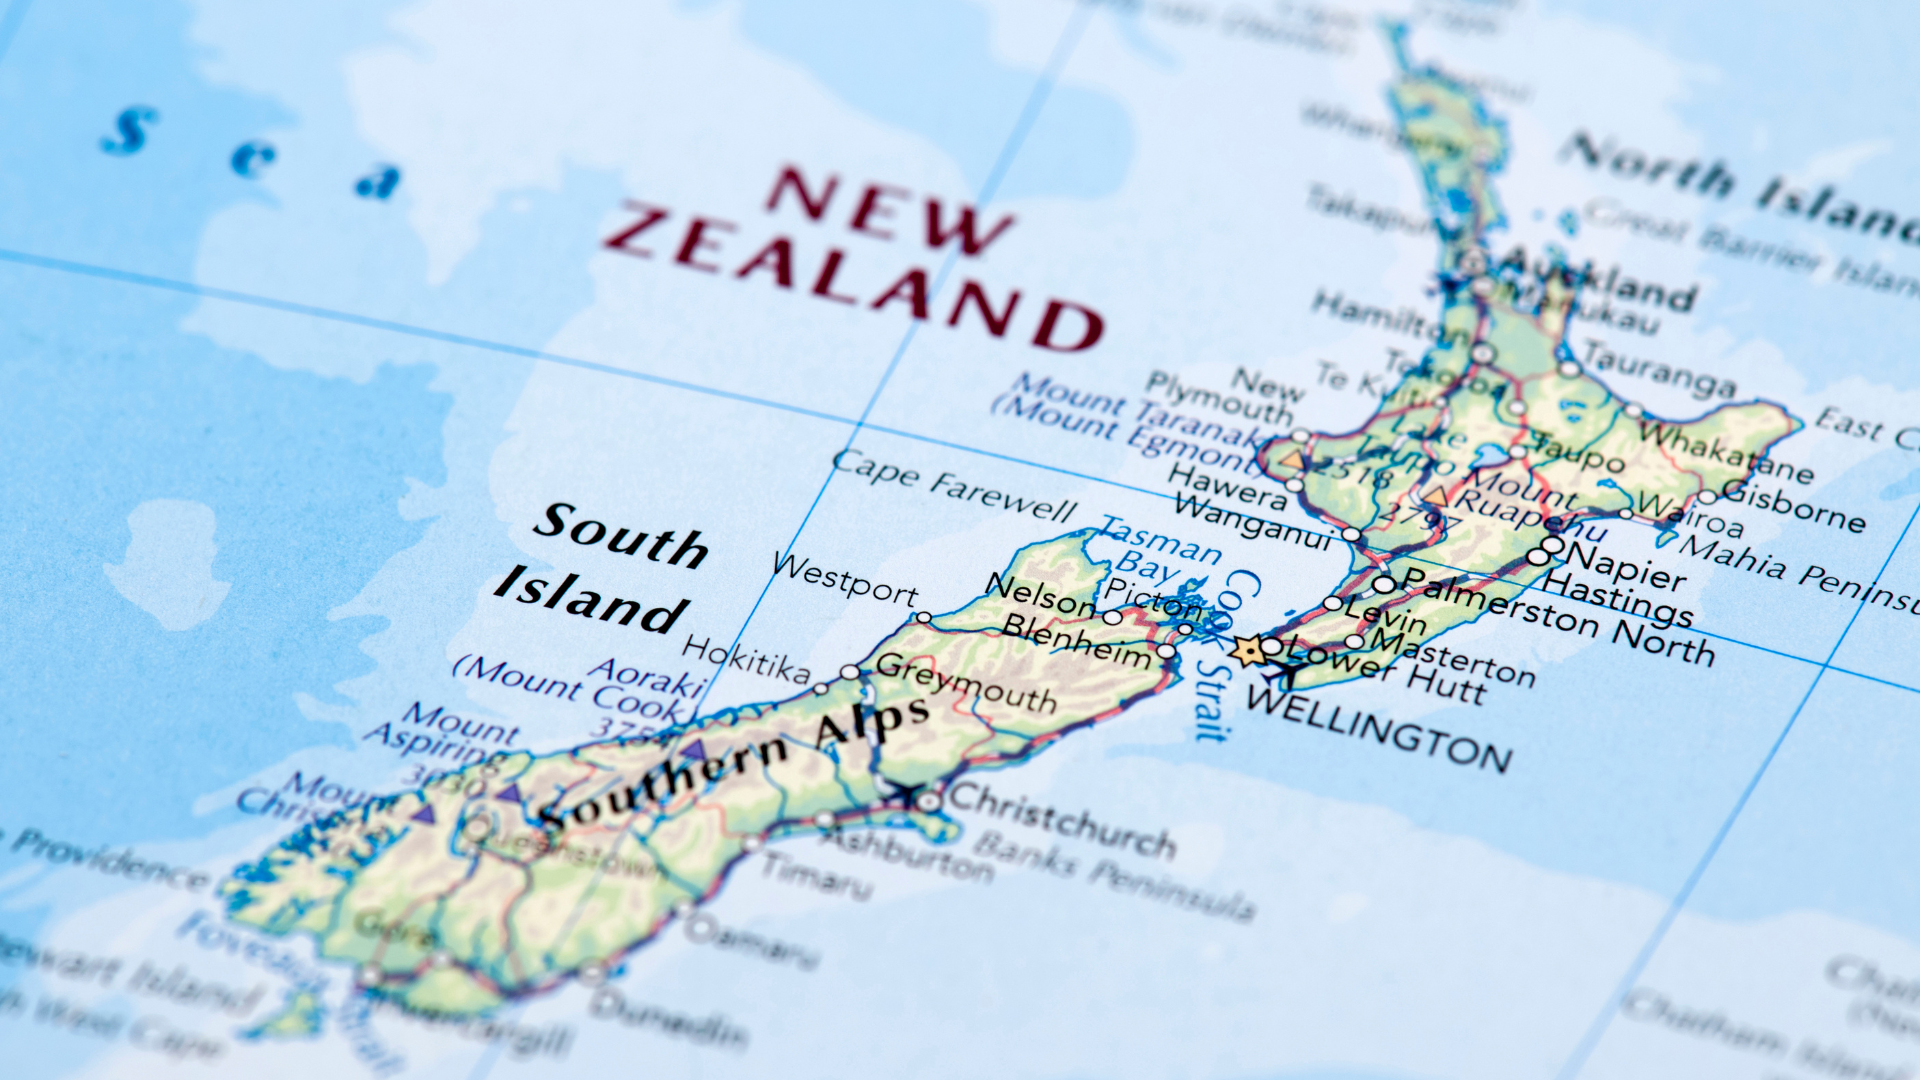 New Zealand to Issue Apology Following Inquiry into Widespread Abuse of Vulnerable Populations